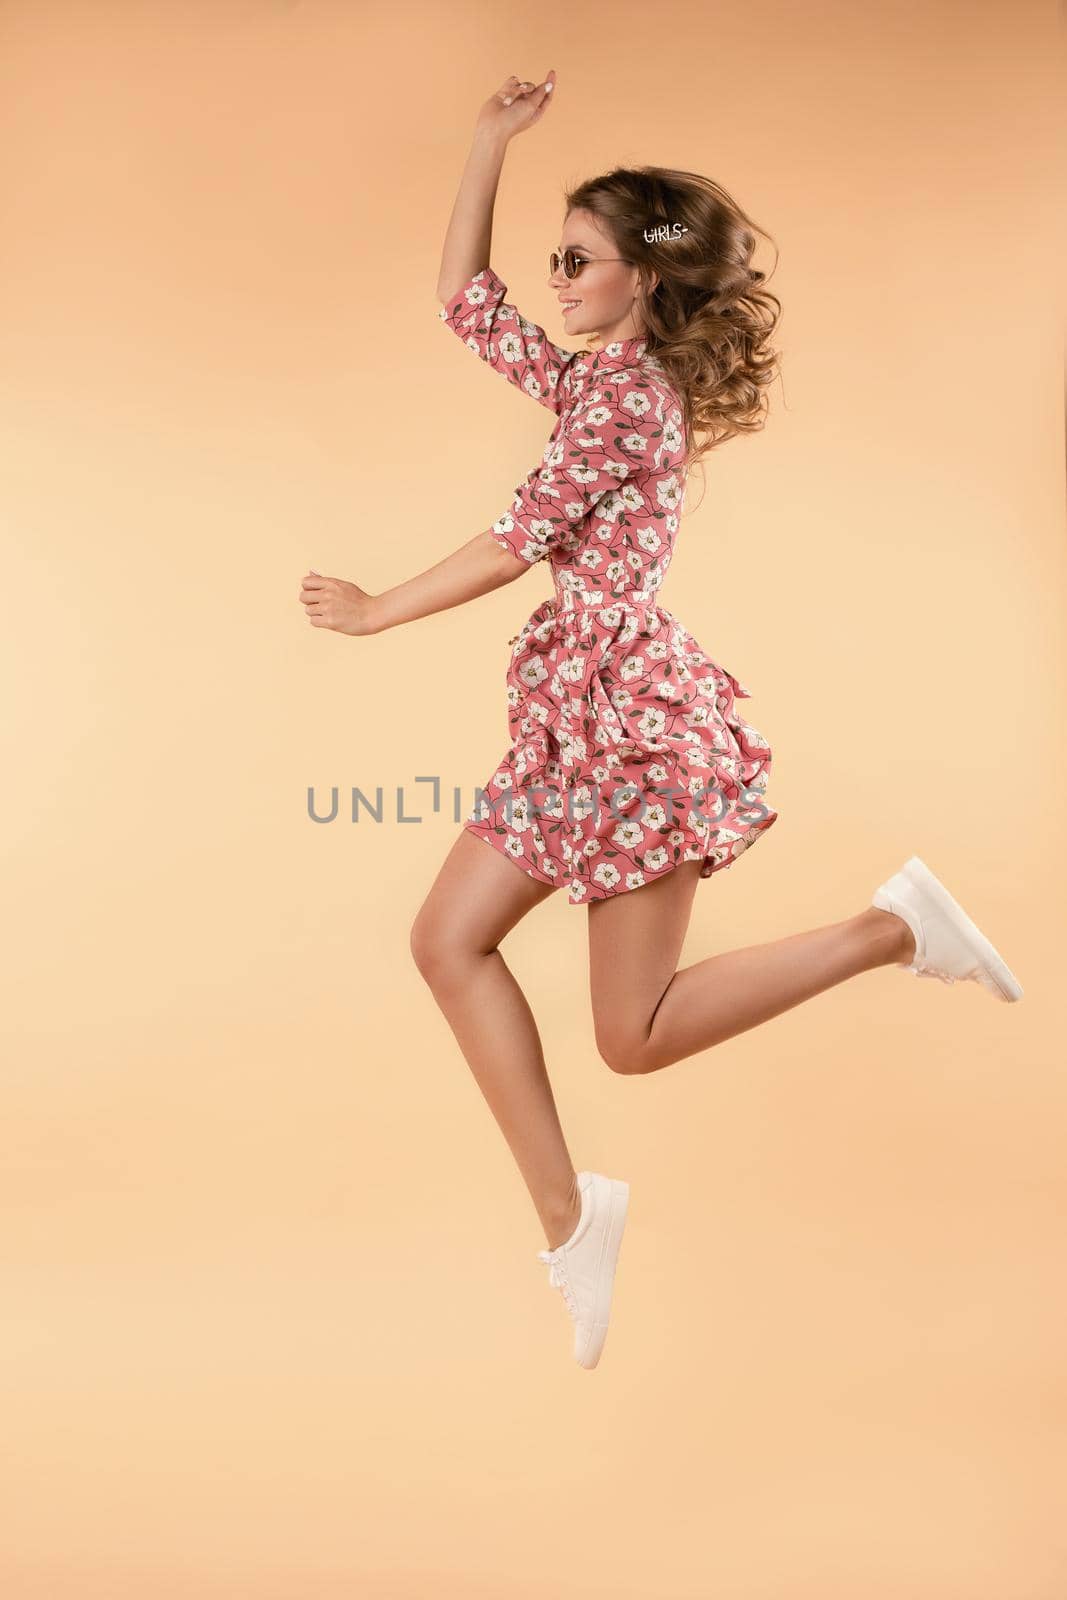 Girl in pink floral dress jumping and laughing in studio by StudioLucky